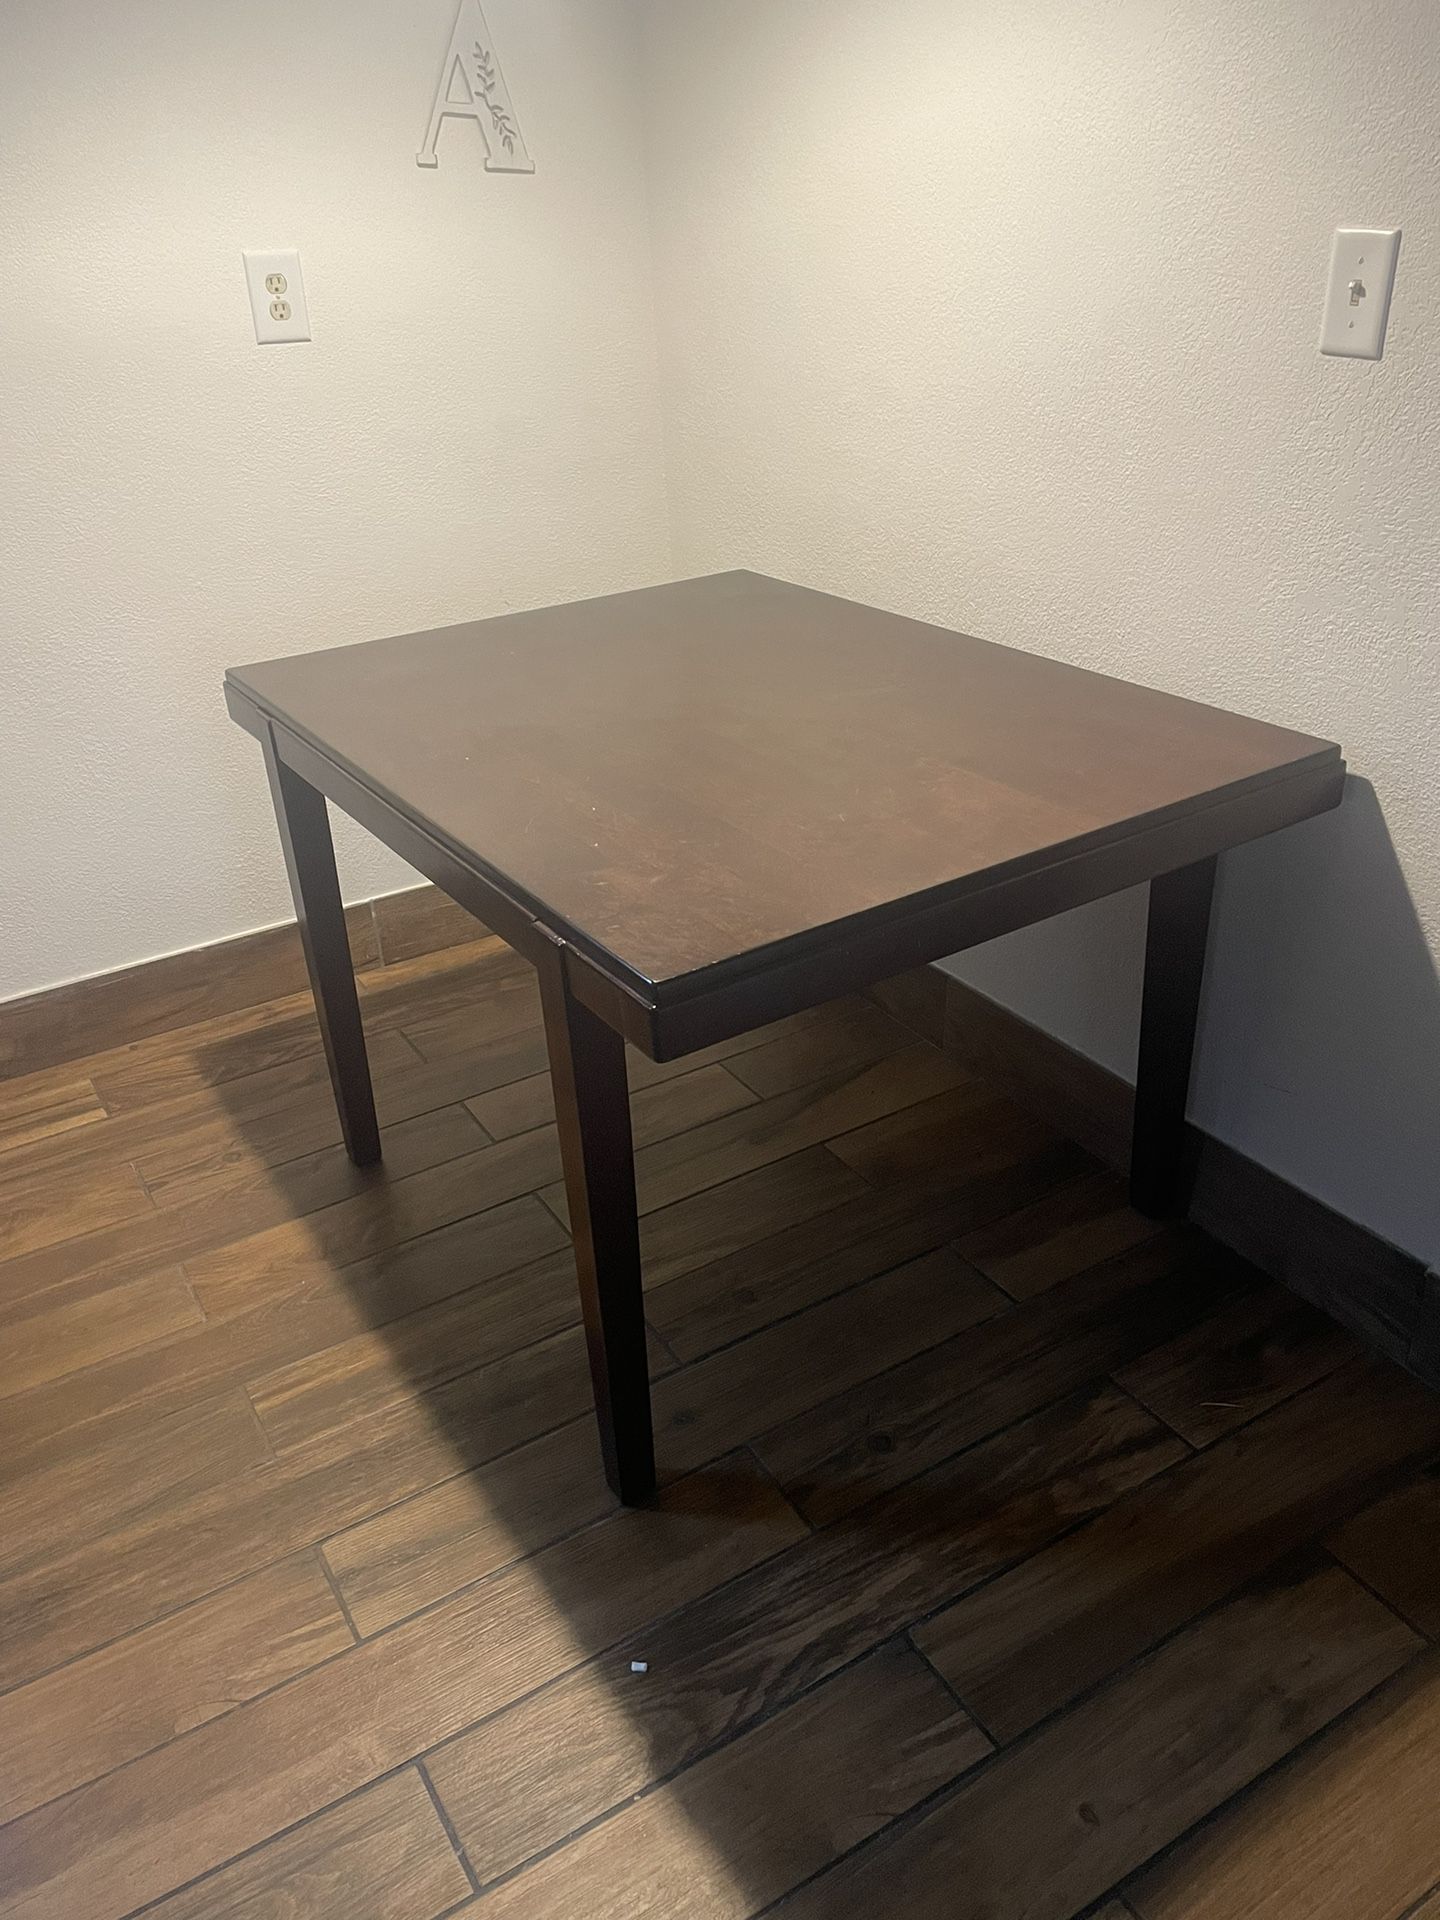 Dining Table With Chairs For Sale